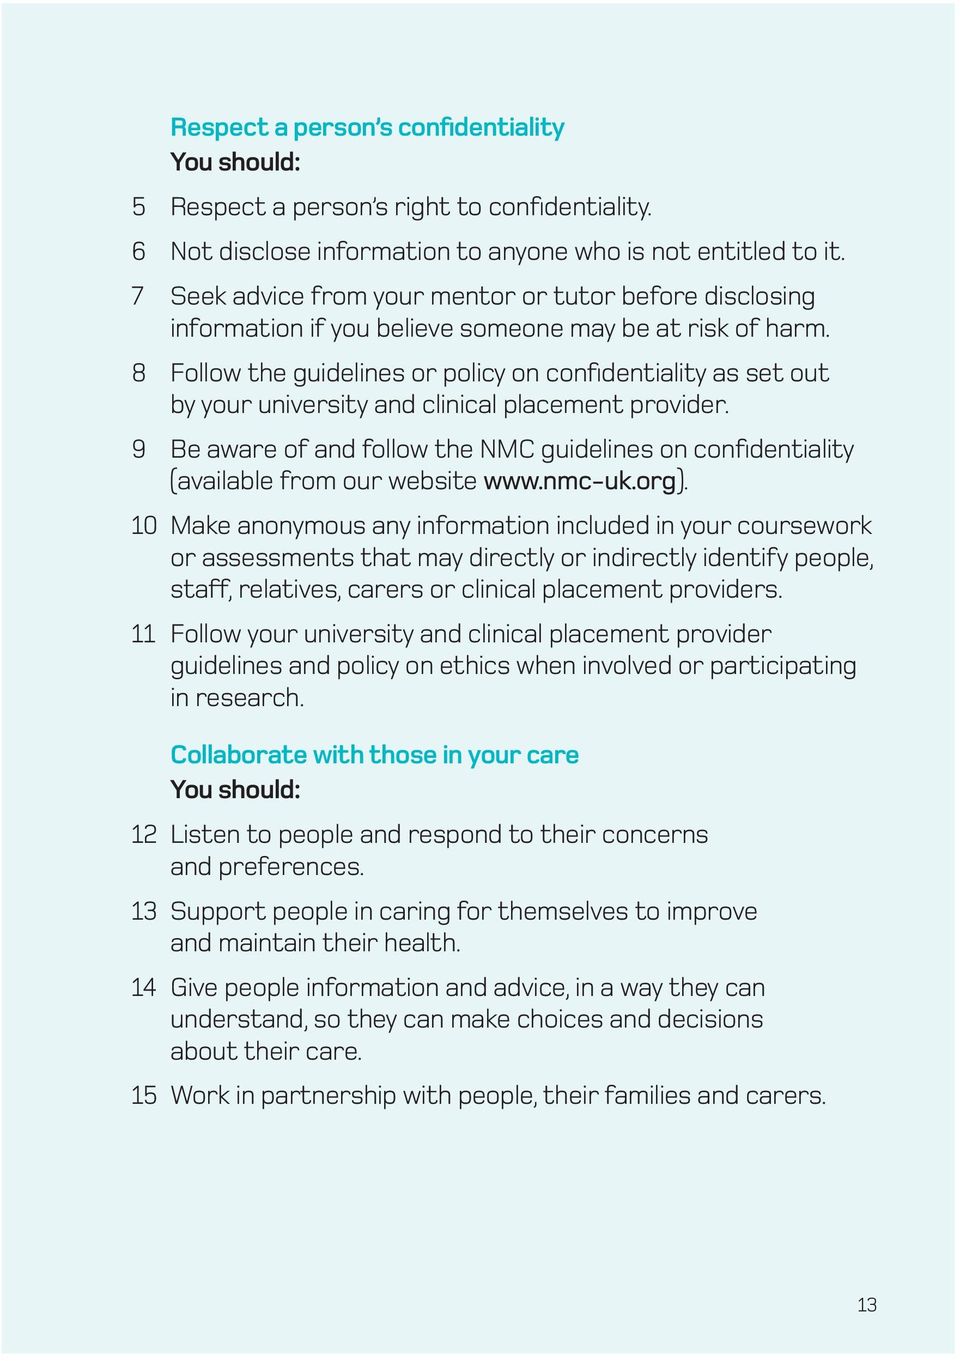 8 Follow the guidelines or policy on confidentiality as set out by your university and clinical placement provider.